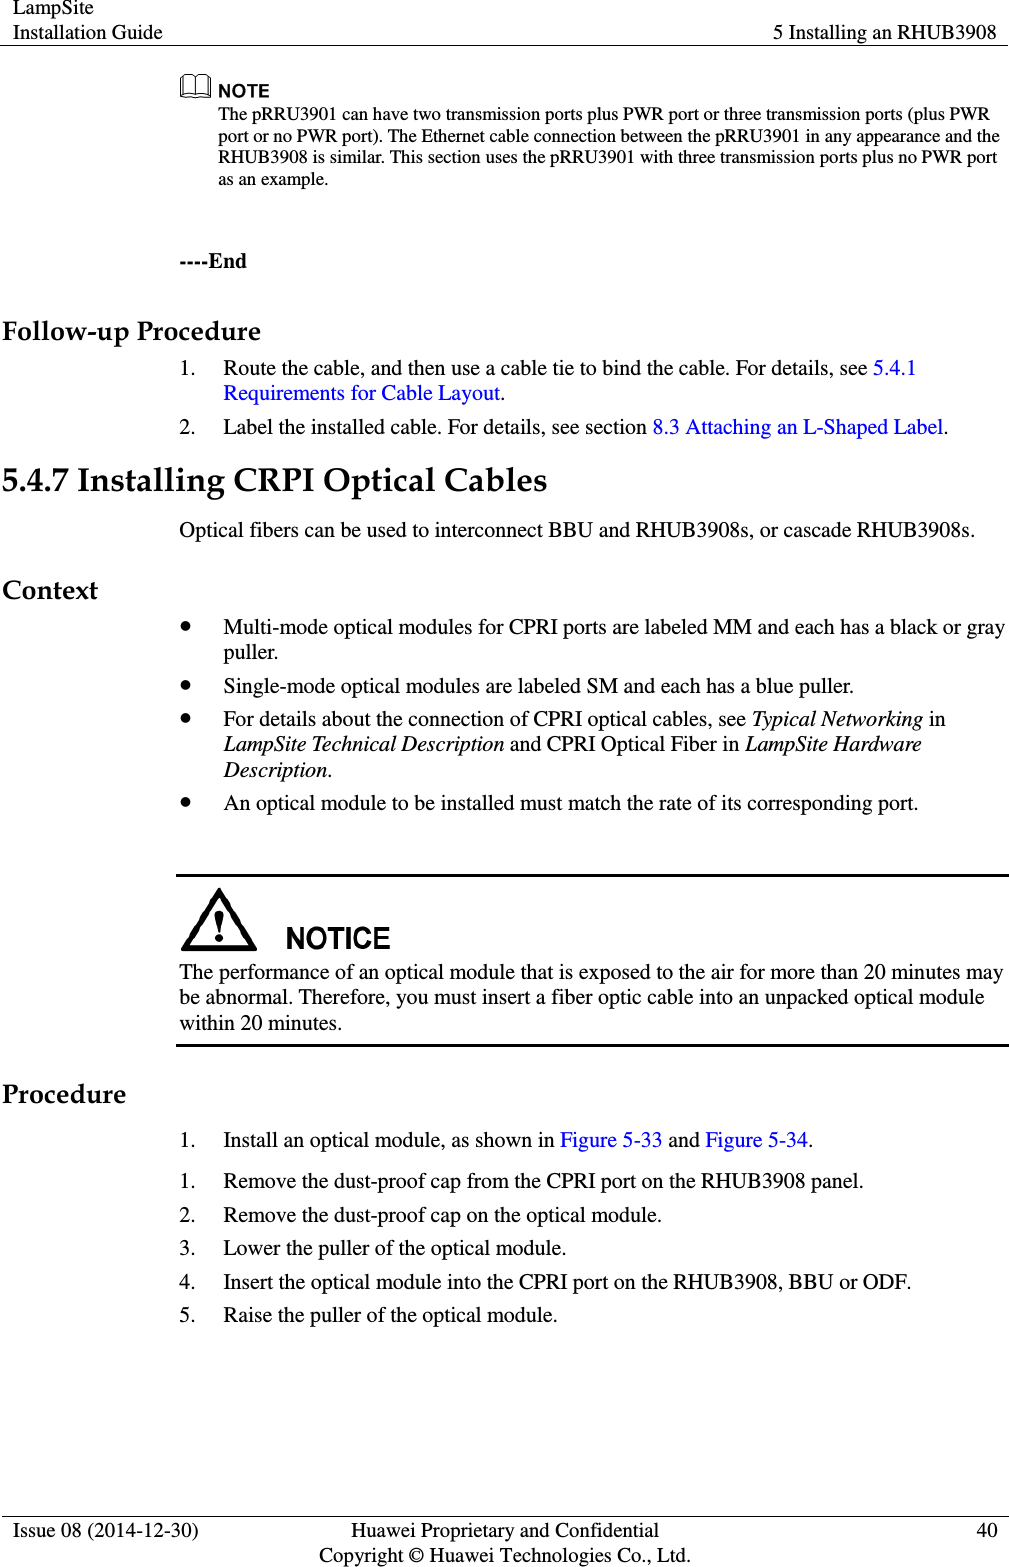 LampSite Installation Guide 5 Installing an RHUB3908  Issue 08 (2014-12-30) Huawei Proprietary and Confidential                                     Copyright © Huawei Technologies Co., Ltd. 40   The pRRU3901 can have two transmission ports plus PWR port or three transmission ports (plus PWR port or no PWR port). The Ethernet cable connection between the pRRU3901 in any appearance and the RHUB3908 is similar. This section uses the pRRU3901 with three transmission ports plus no PWR port as an example.  ----End Follow-up Procedure 1. Route the cable, and then use a cable tie to bind the cable. For details, see 5.4.1 Requirements for Cable Layout. 2. Label the installed cable. For details, see section 8.3 Attaching an L-Shaped Label. 5.4.7 Installing CRPI Optical Cables Optical fibers can be used to interconnect BBU and RHUB3908s, or cascade RHUB3908s. Context  Multi-mode optical modules for CPRI ports are labeled MM and each has a black or gray puller.  Single-mode optical modules are labeled SM and each has a blue puller.  For details about the connection of CPRI optical cables, see Typical Networking in LampSite Technical Description and CPRI Optical Fiber in LampSite Hardware Description.  An optical module to be installed must match the rate of its corresponding port.   The performance of an optical module that is exposed to the air for more than 20 minutes may be abnormal. Therefore, you must insert a fiber optic cable into an unpacked optical module within 20 minutes.       Procedure 1. Install an optical module, as shown in Figure 5-33 and Figure 5-34. 1. Remove the dust-proof cap from the CPRI port on the RHUB3908 panel. 2. Remove the dust-proof cap on the optical module. 3. Lower the puller of the optical module. 4. Insert the optical module into the CPRI port on the RHUB3908, BBU or ODF. 5. Raise the puller of the optical module. 